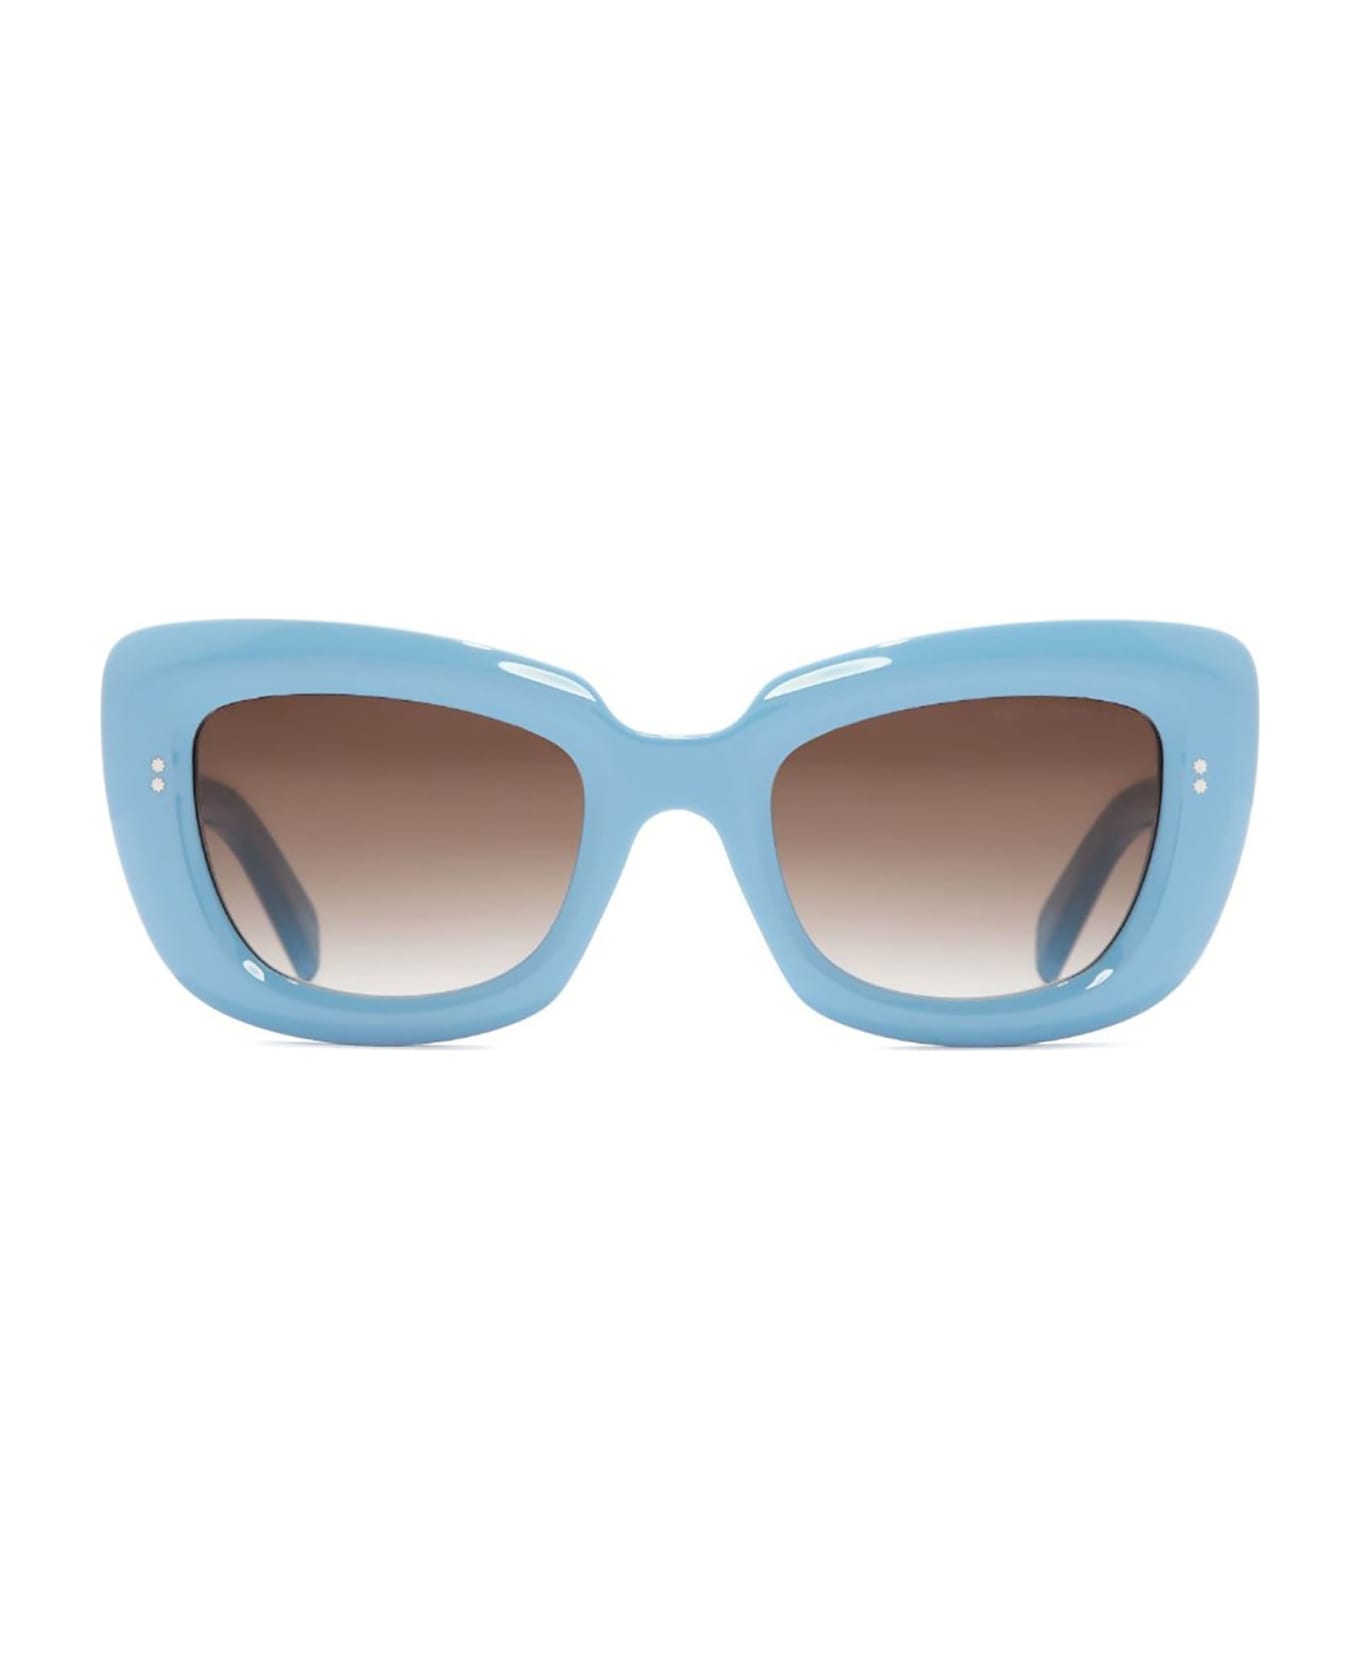 Cutler and Gross 9797 Sunglasses - Solid Ligth Blue